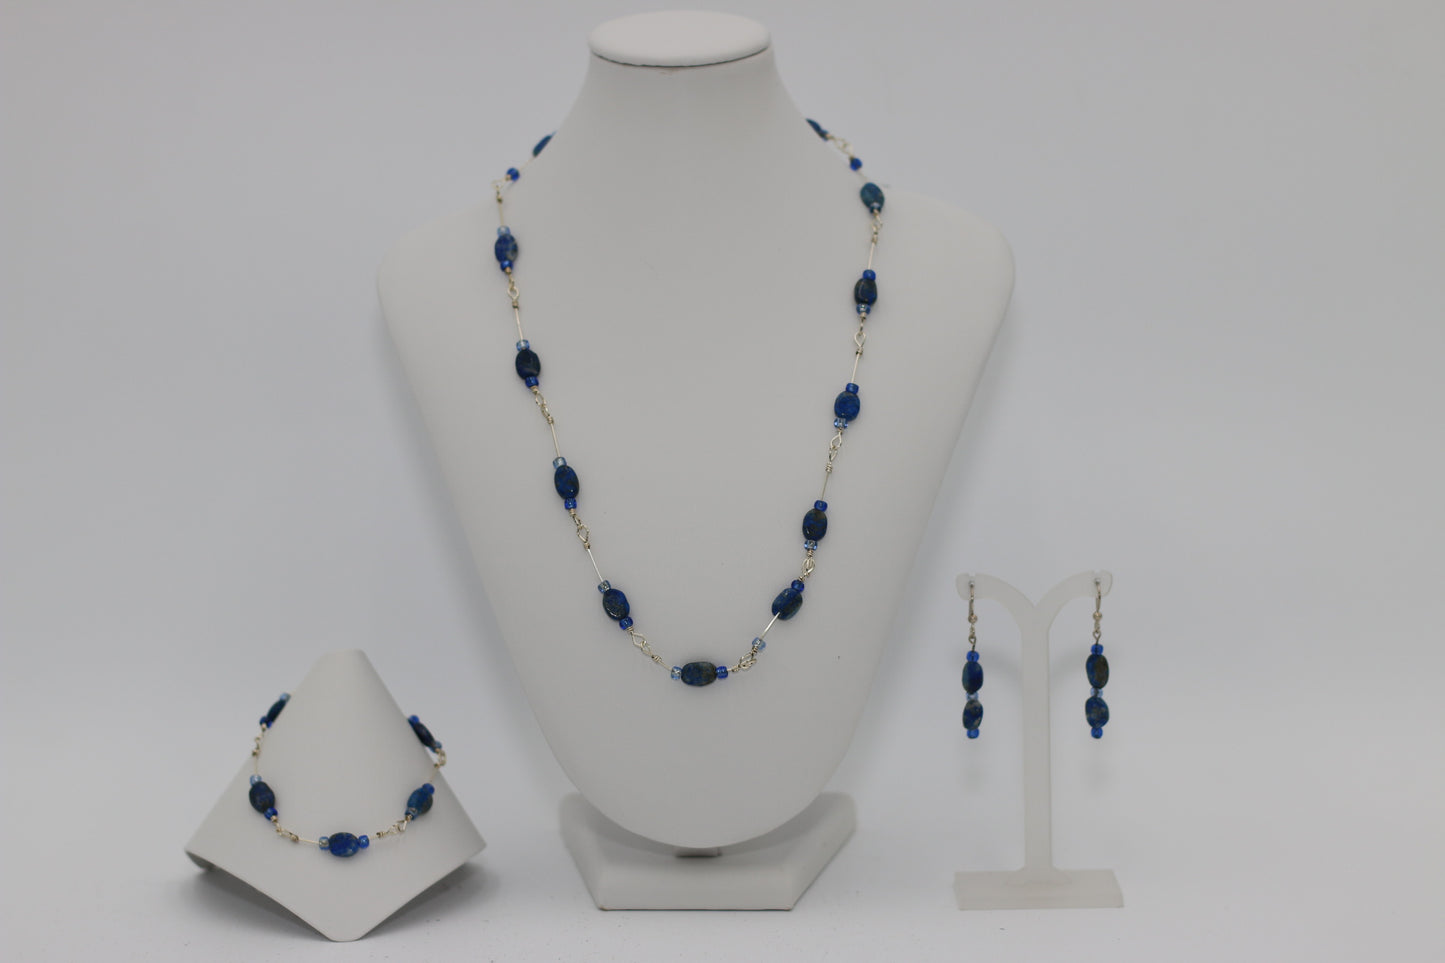 Lapis Blue Natural Gemstones - Annabel's Jewelry & Leather